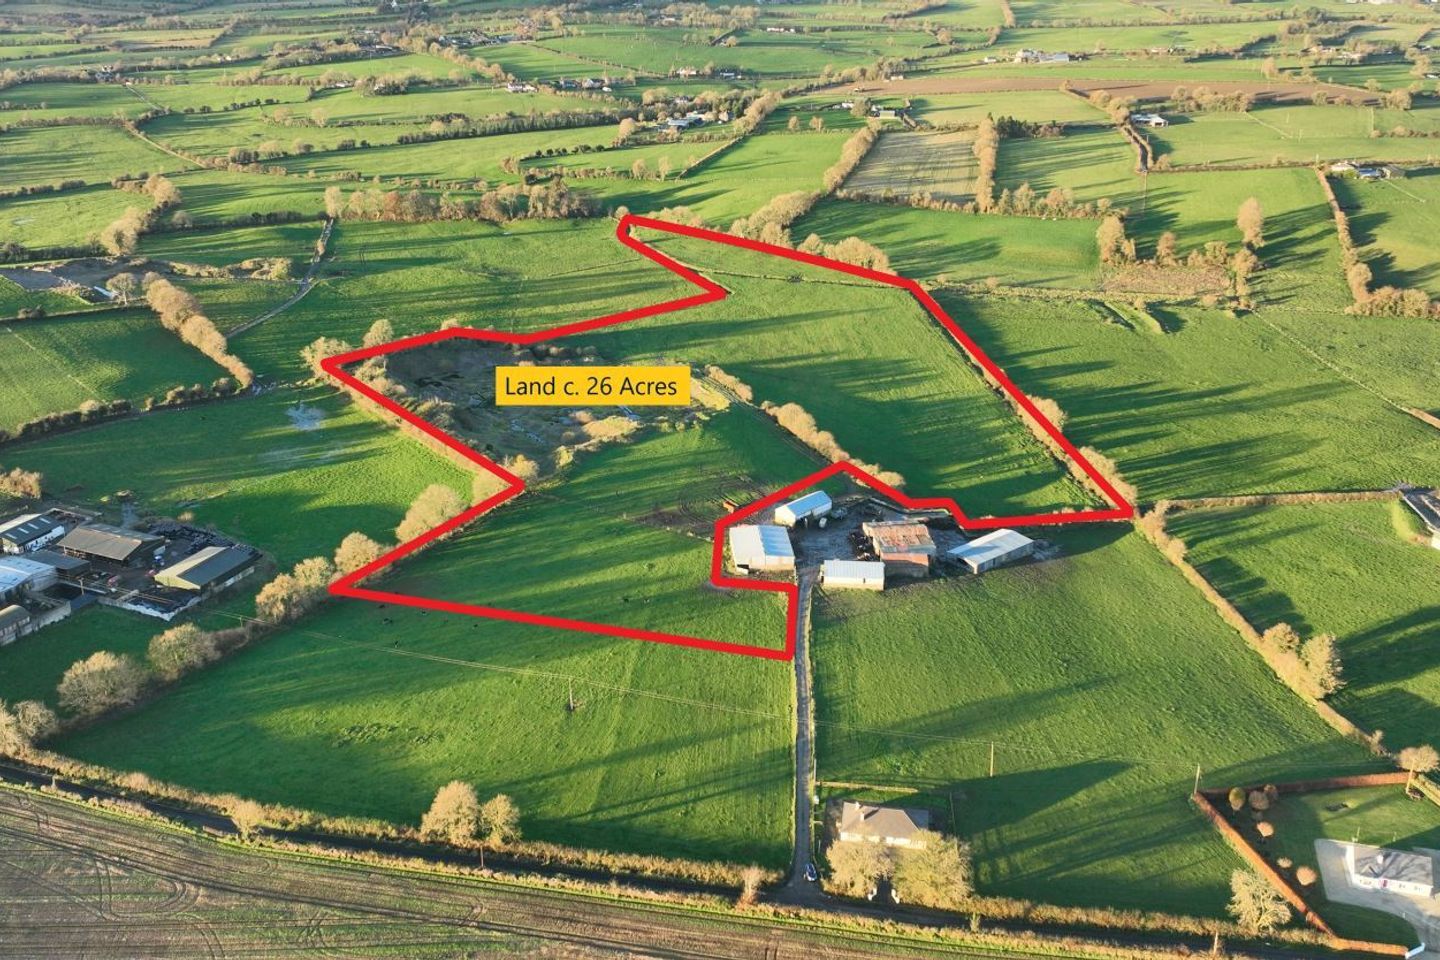 Land c. 26 Acres, Maplestown, Rathvilly, Co. Carlow